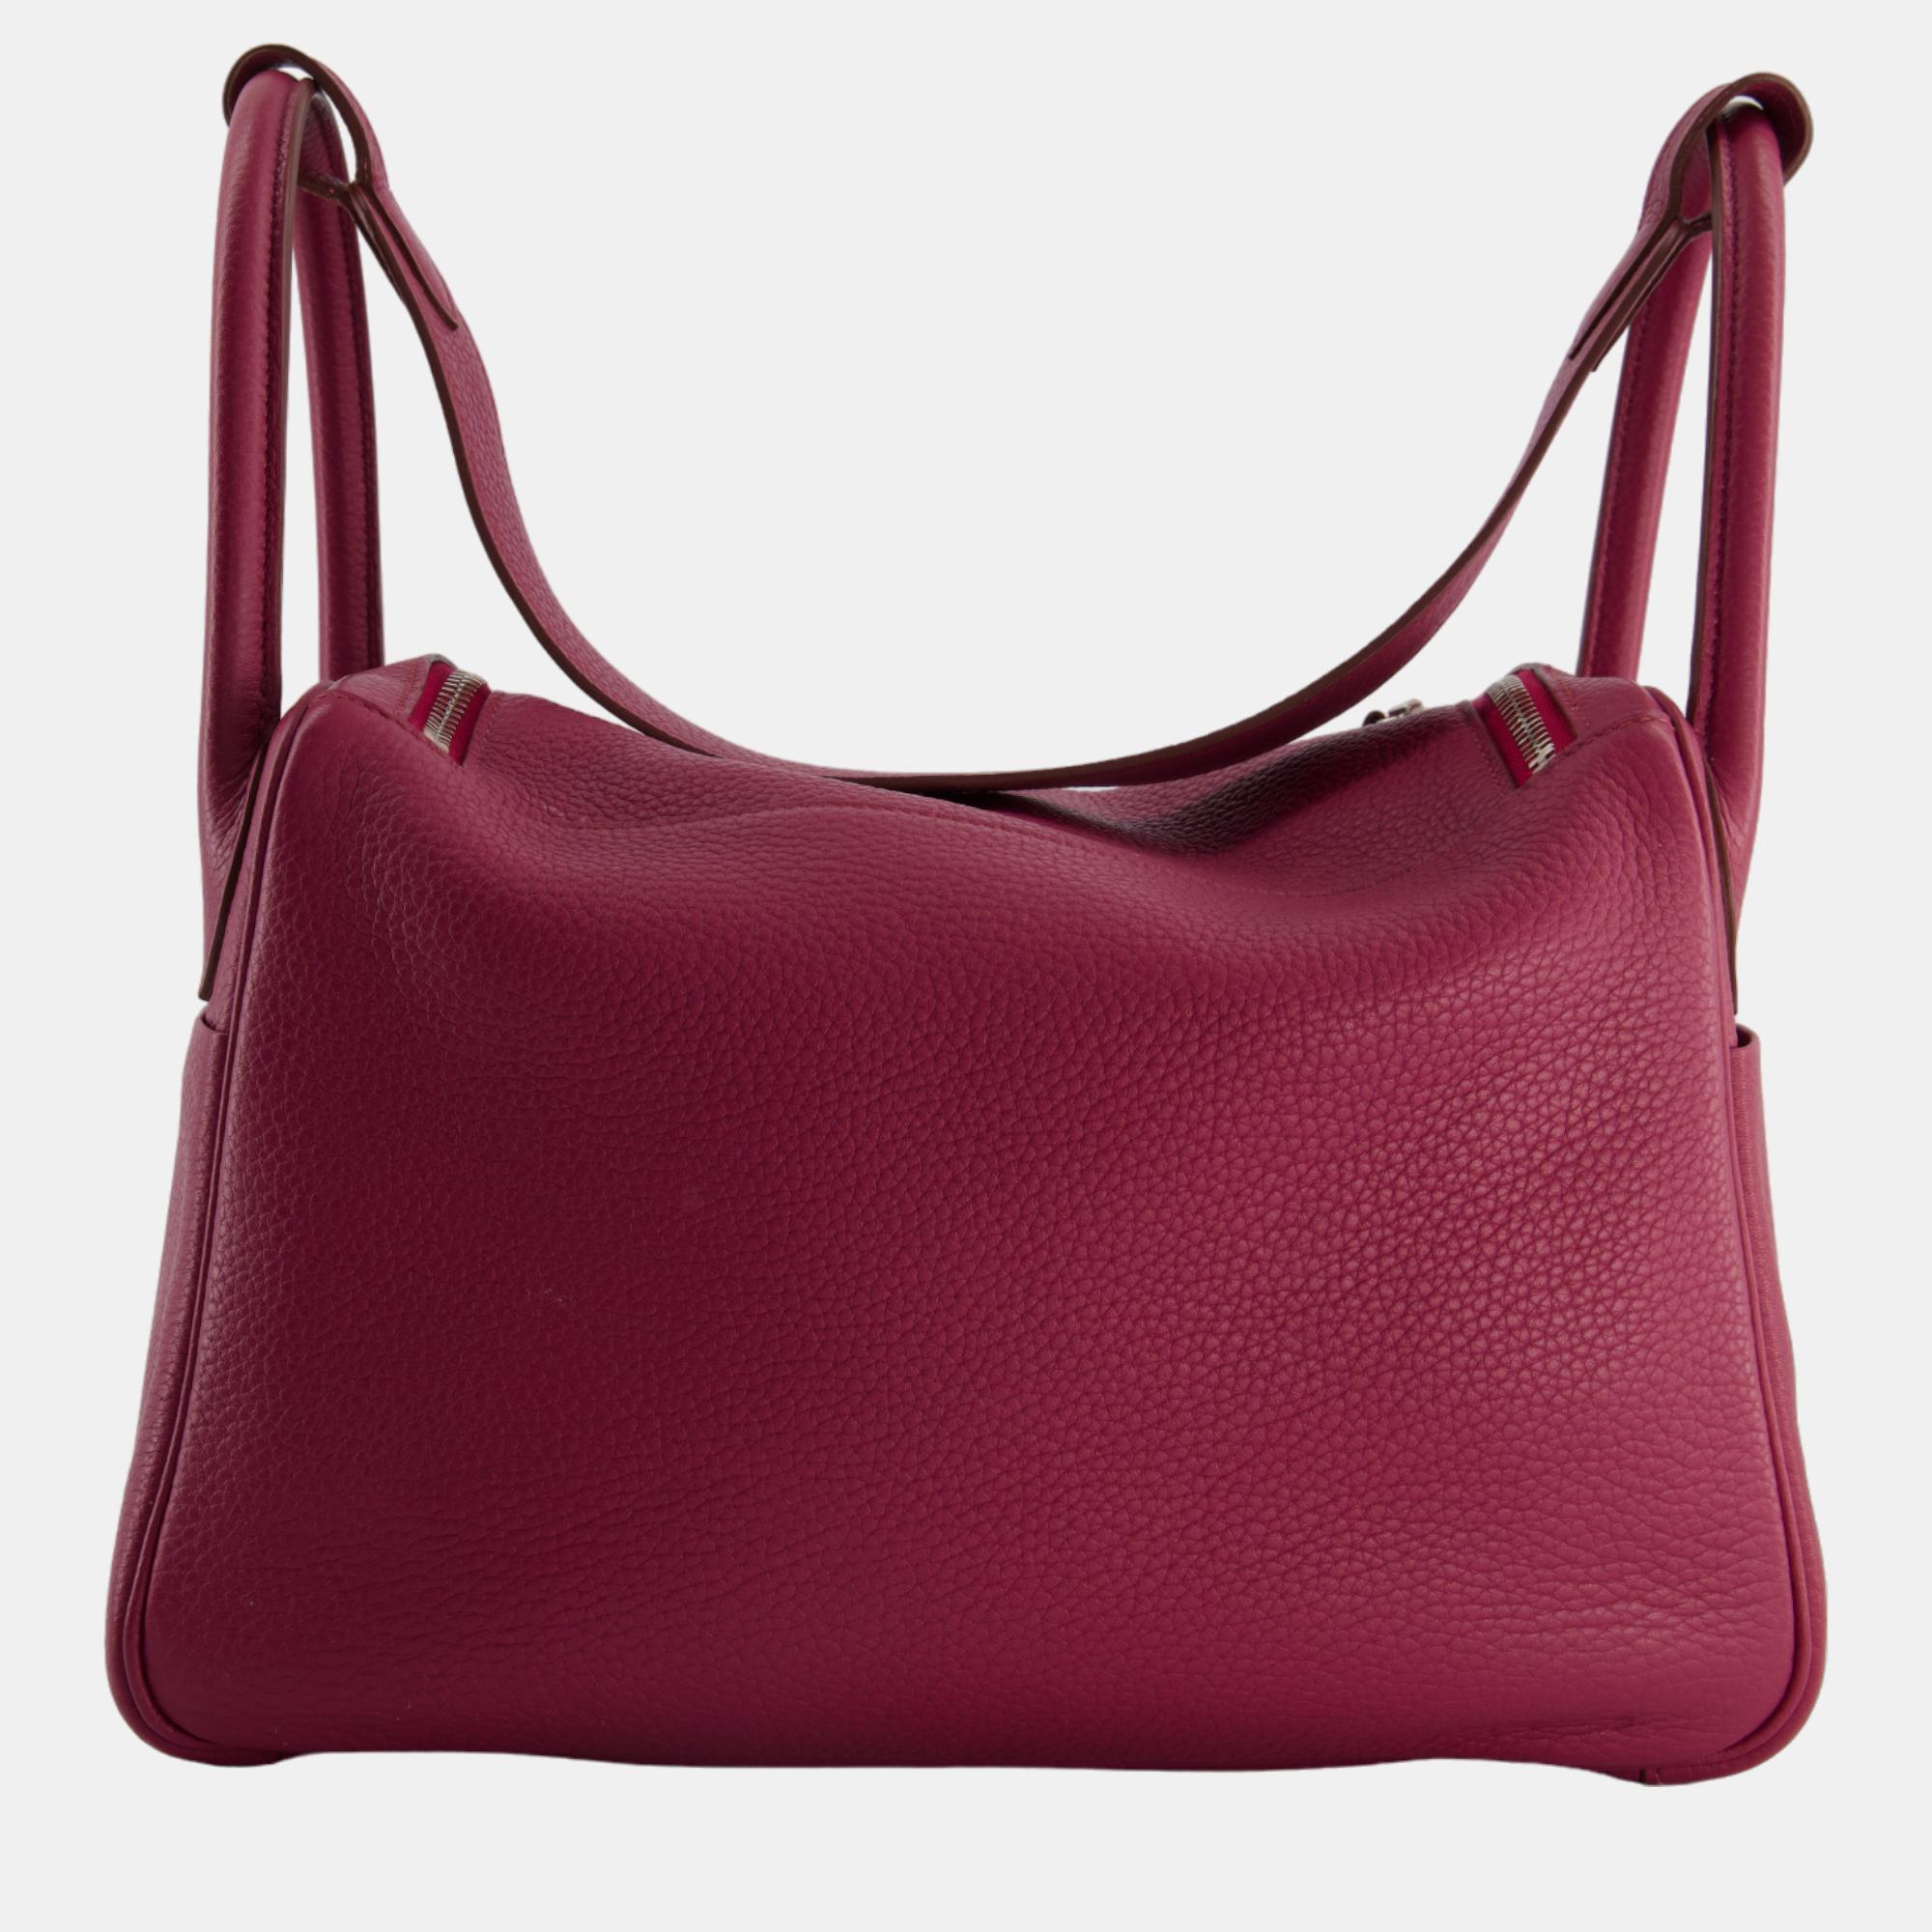 Hermes Lindy Bag 30cm In Rouge Galance In Togo Leather With Palladium Hardware